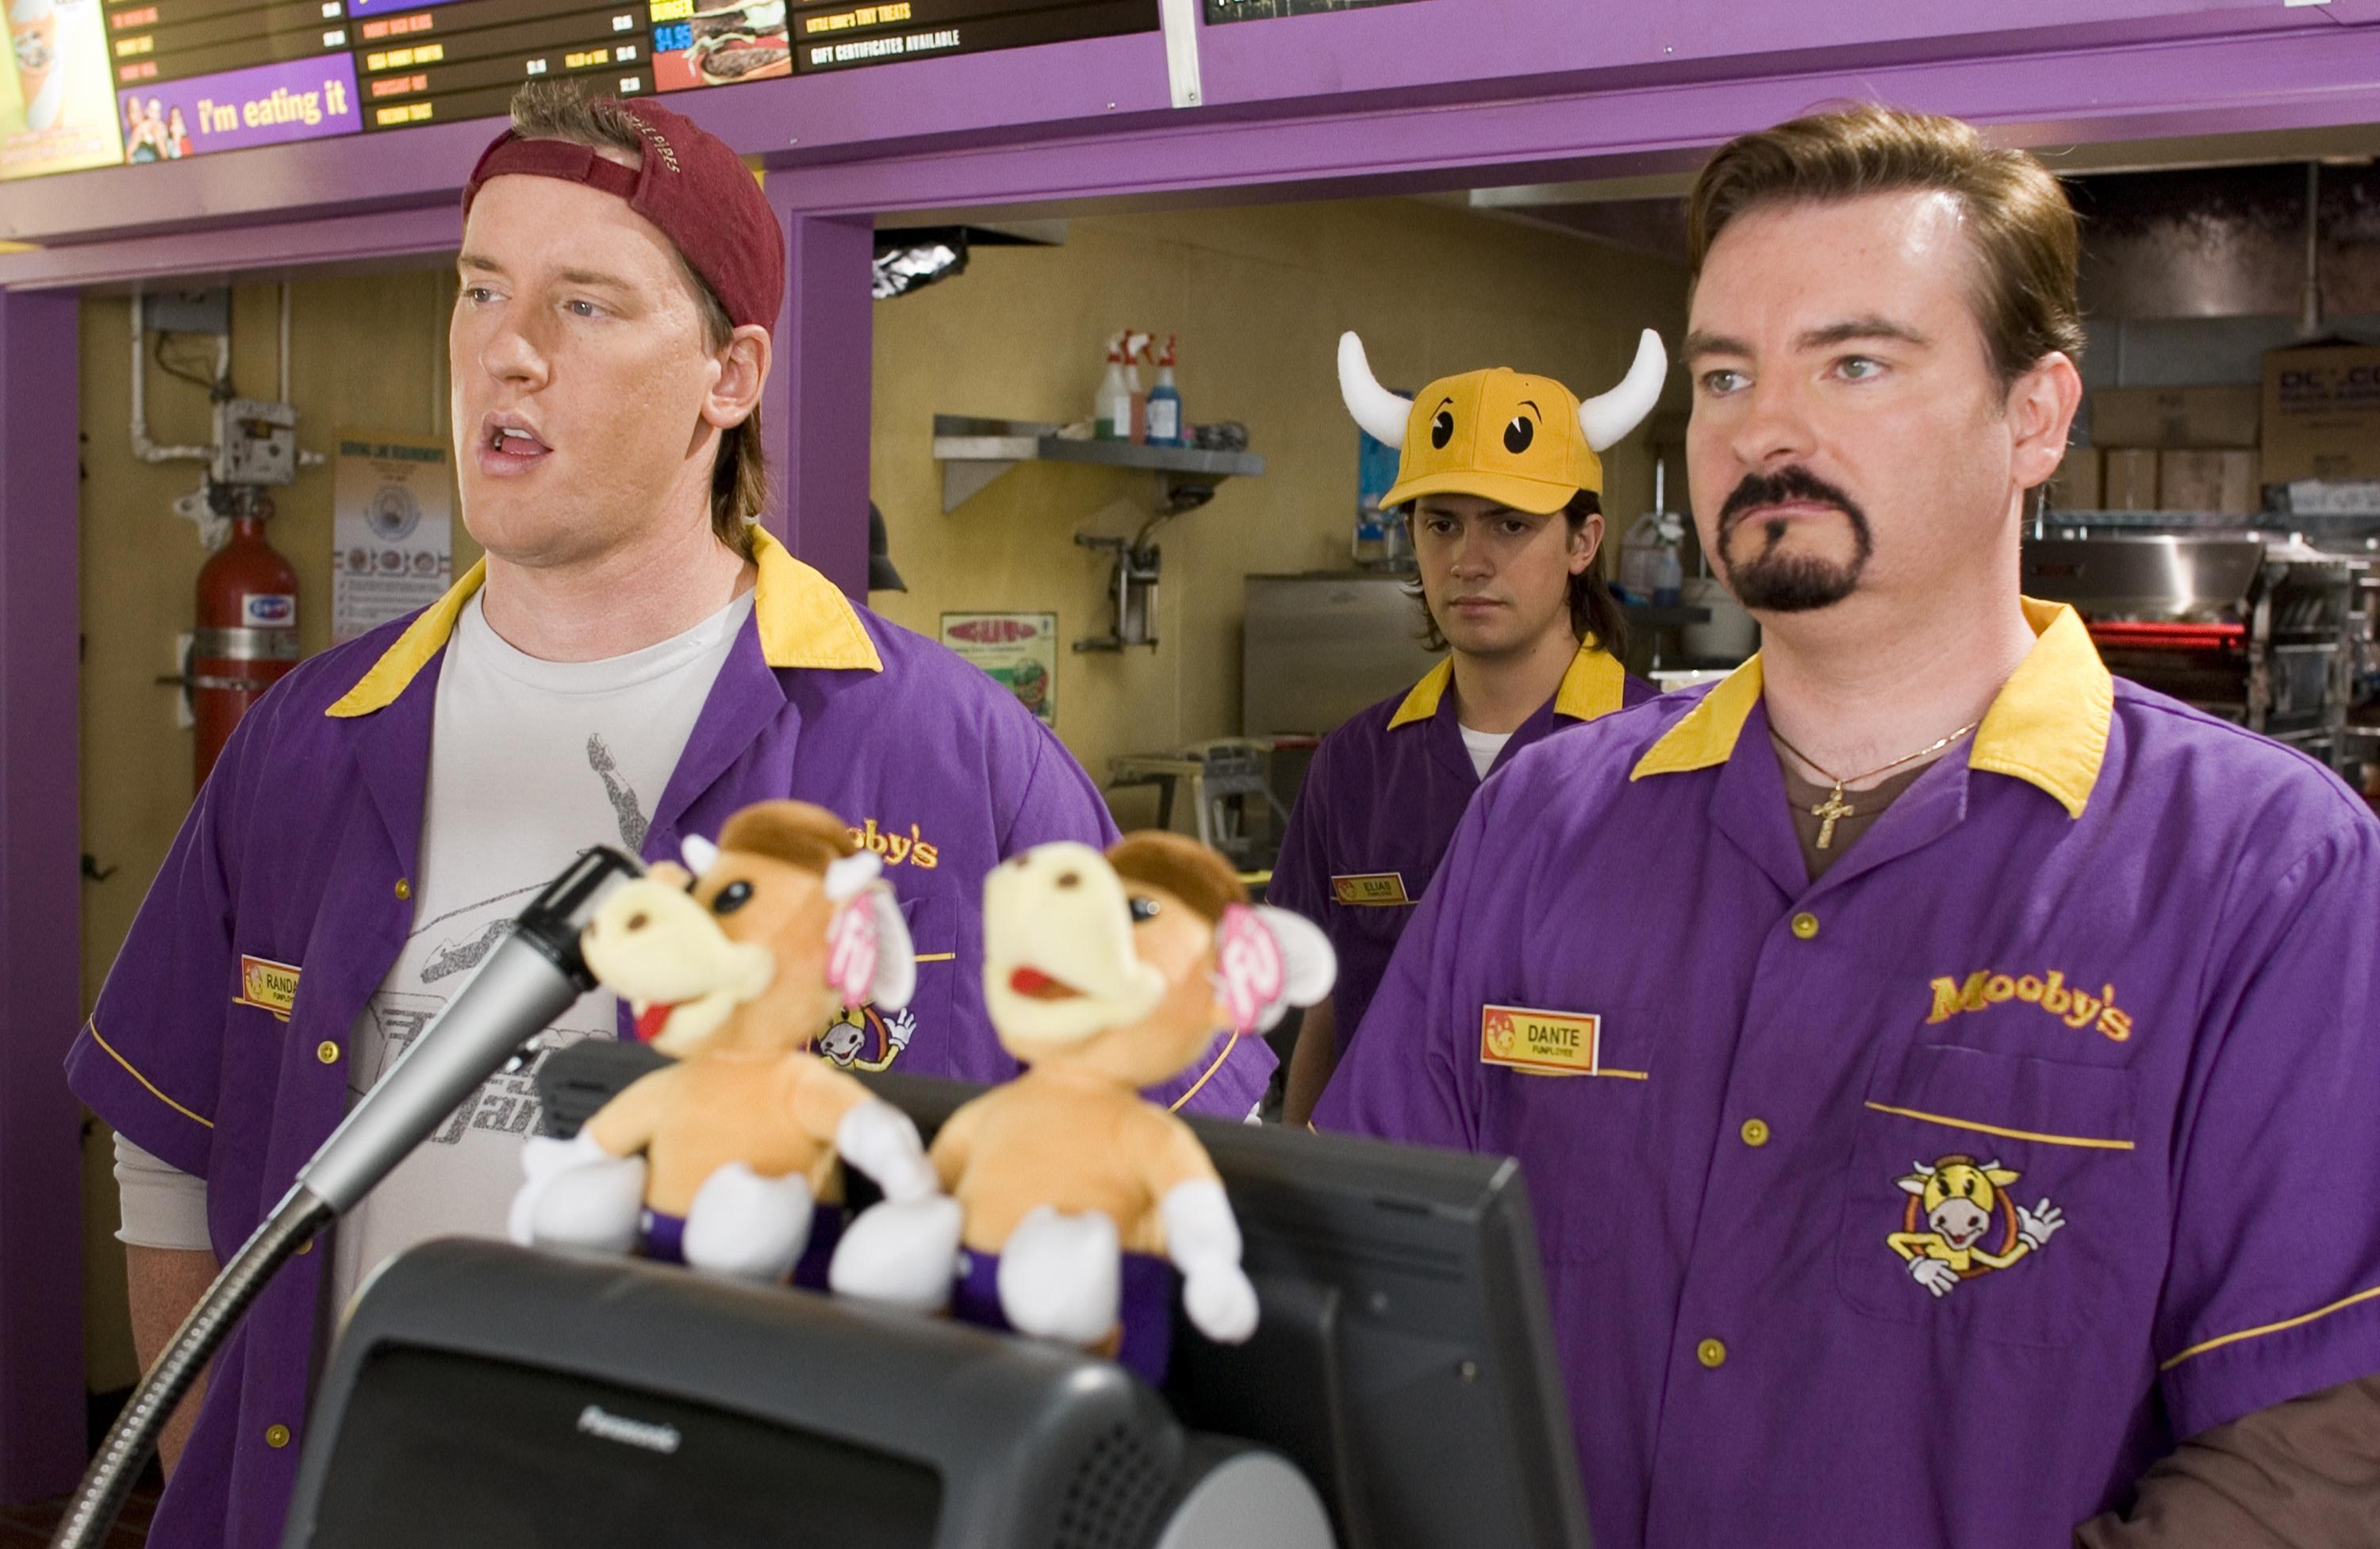 Clerks II Backgrounds, Compatible - PC, Mobile, Gadgets| 3000x1953 px